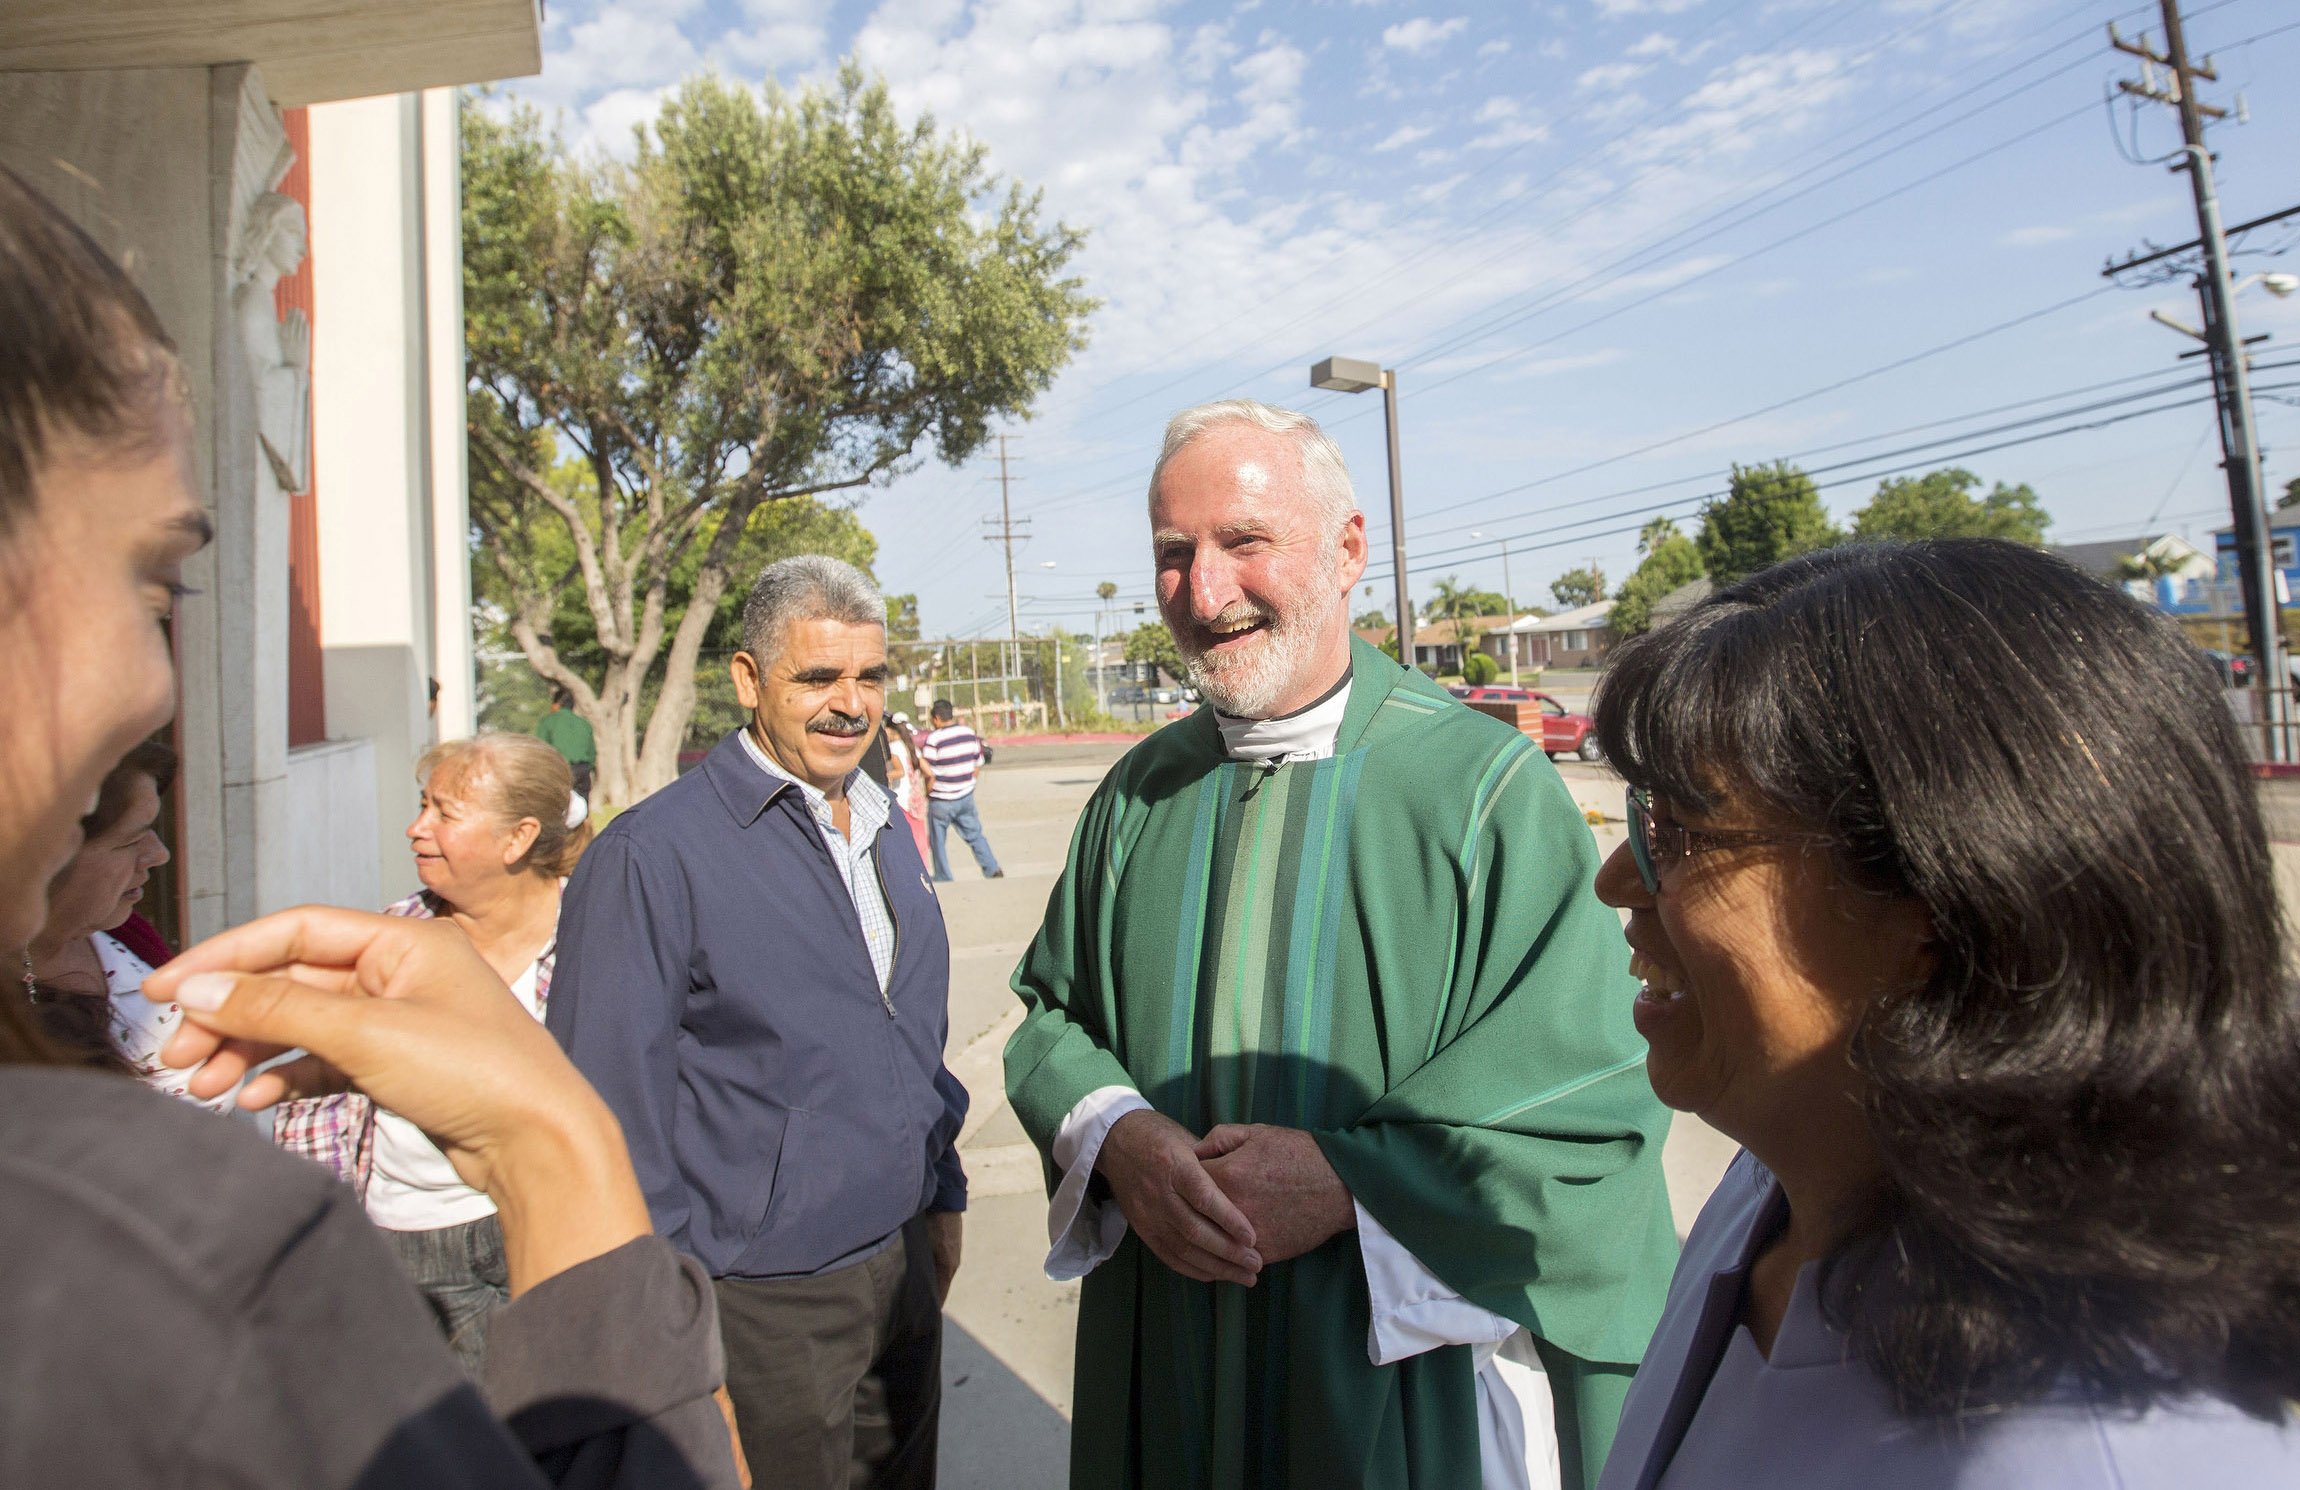 Los Angeles Auxiliary Bishop David G. O'Connell is pictured speaking with parishioners outside St. Frances X. Cabrini Church in Los Angeles July 19, 2015. According to local news reports, Los Angeles County sheriffs found him dead of a gunshot wound at his home Feb. 18, 2023, and his death has been ruled a homicide. An investigation was under way for a suspect and motive. A native of Ireland, he spent most of his four decades as a priest ministering in the inner city of Los Angeles. He was 69. Editors: This cutline has been updated to reflect new details about the bishop's death. (OSV News photo/CNS file, John Rueda, The Tidings)